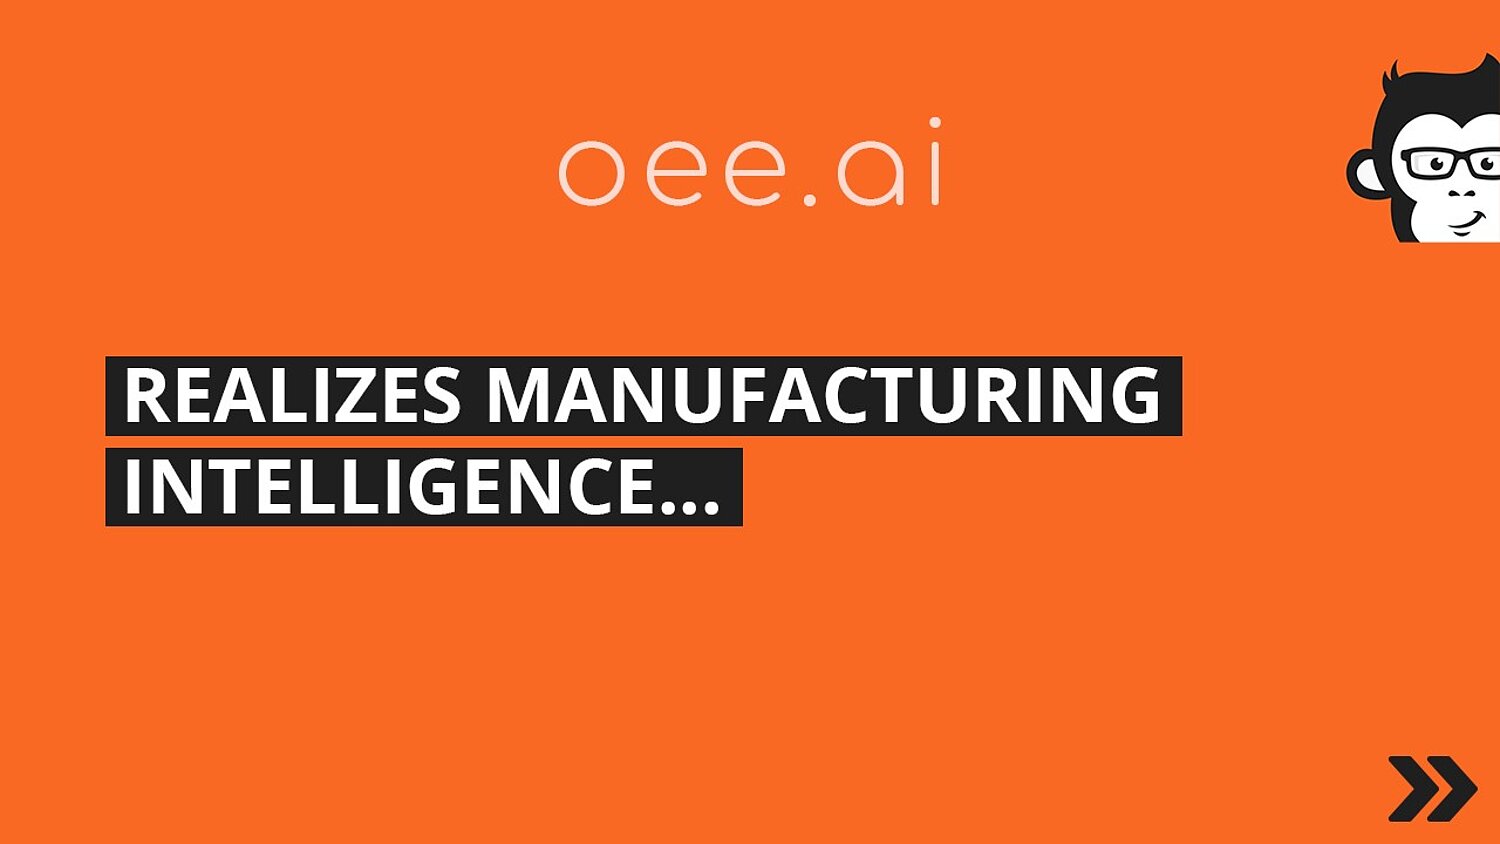 mApp ifp software oee.ai Manufacturing Itelligence